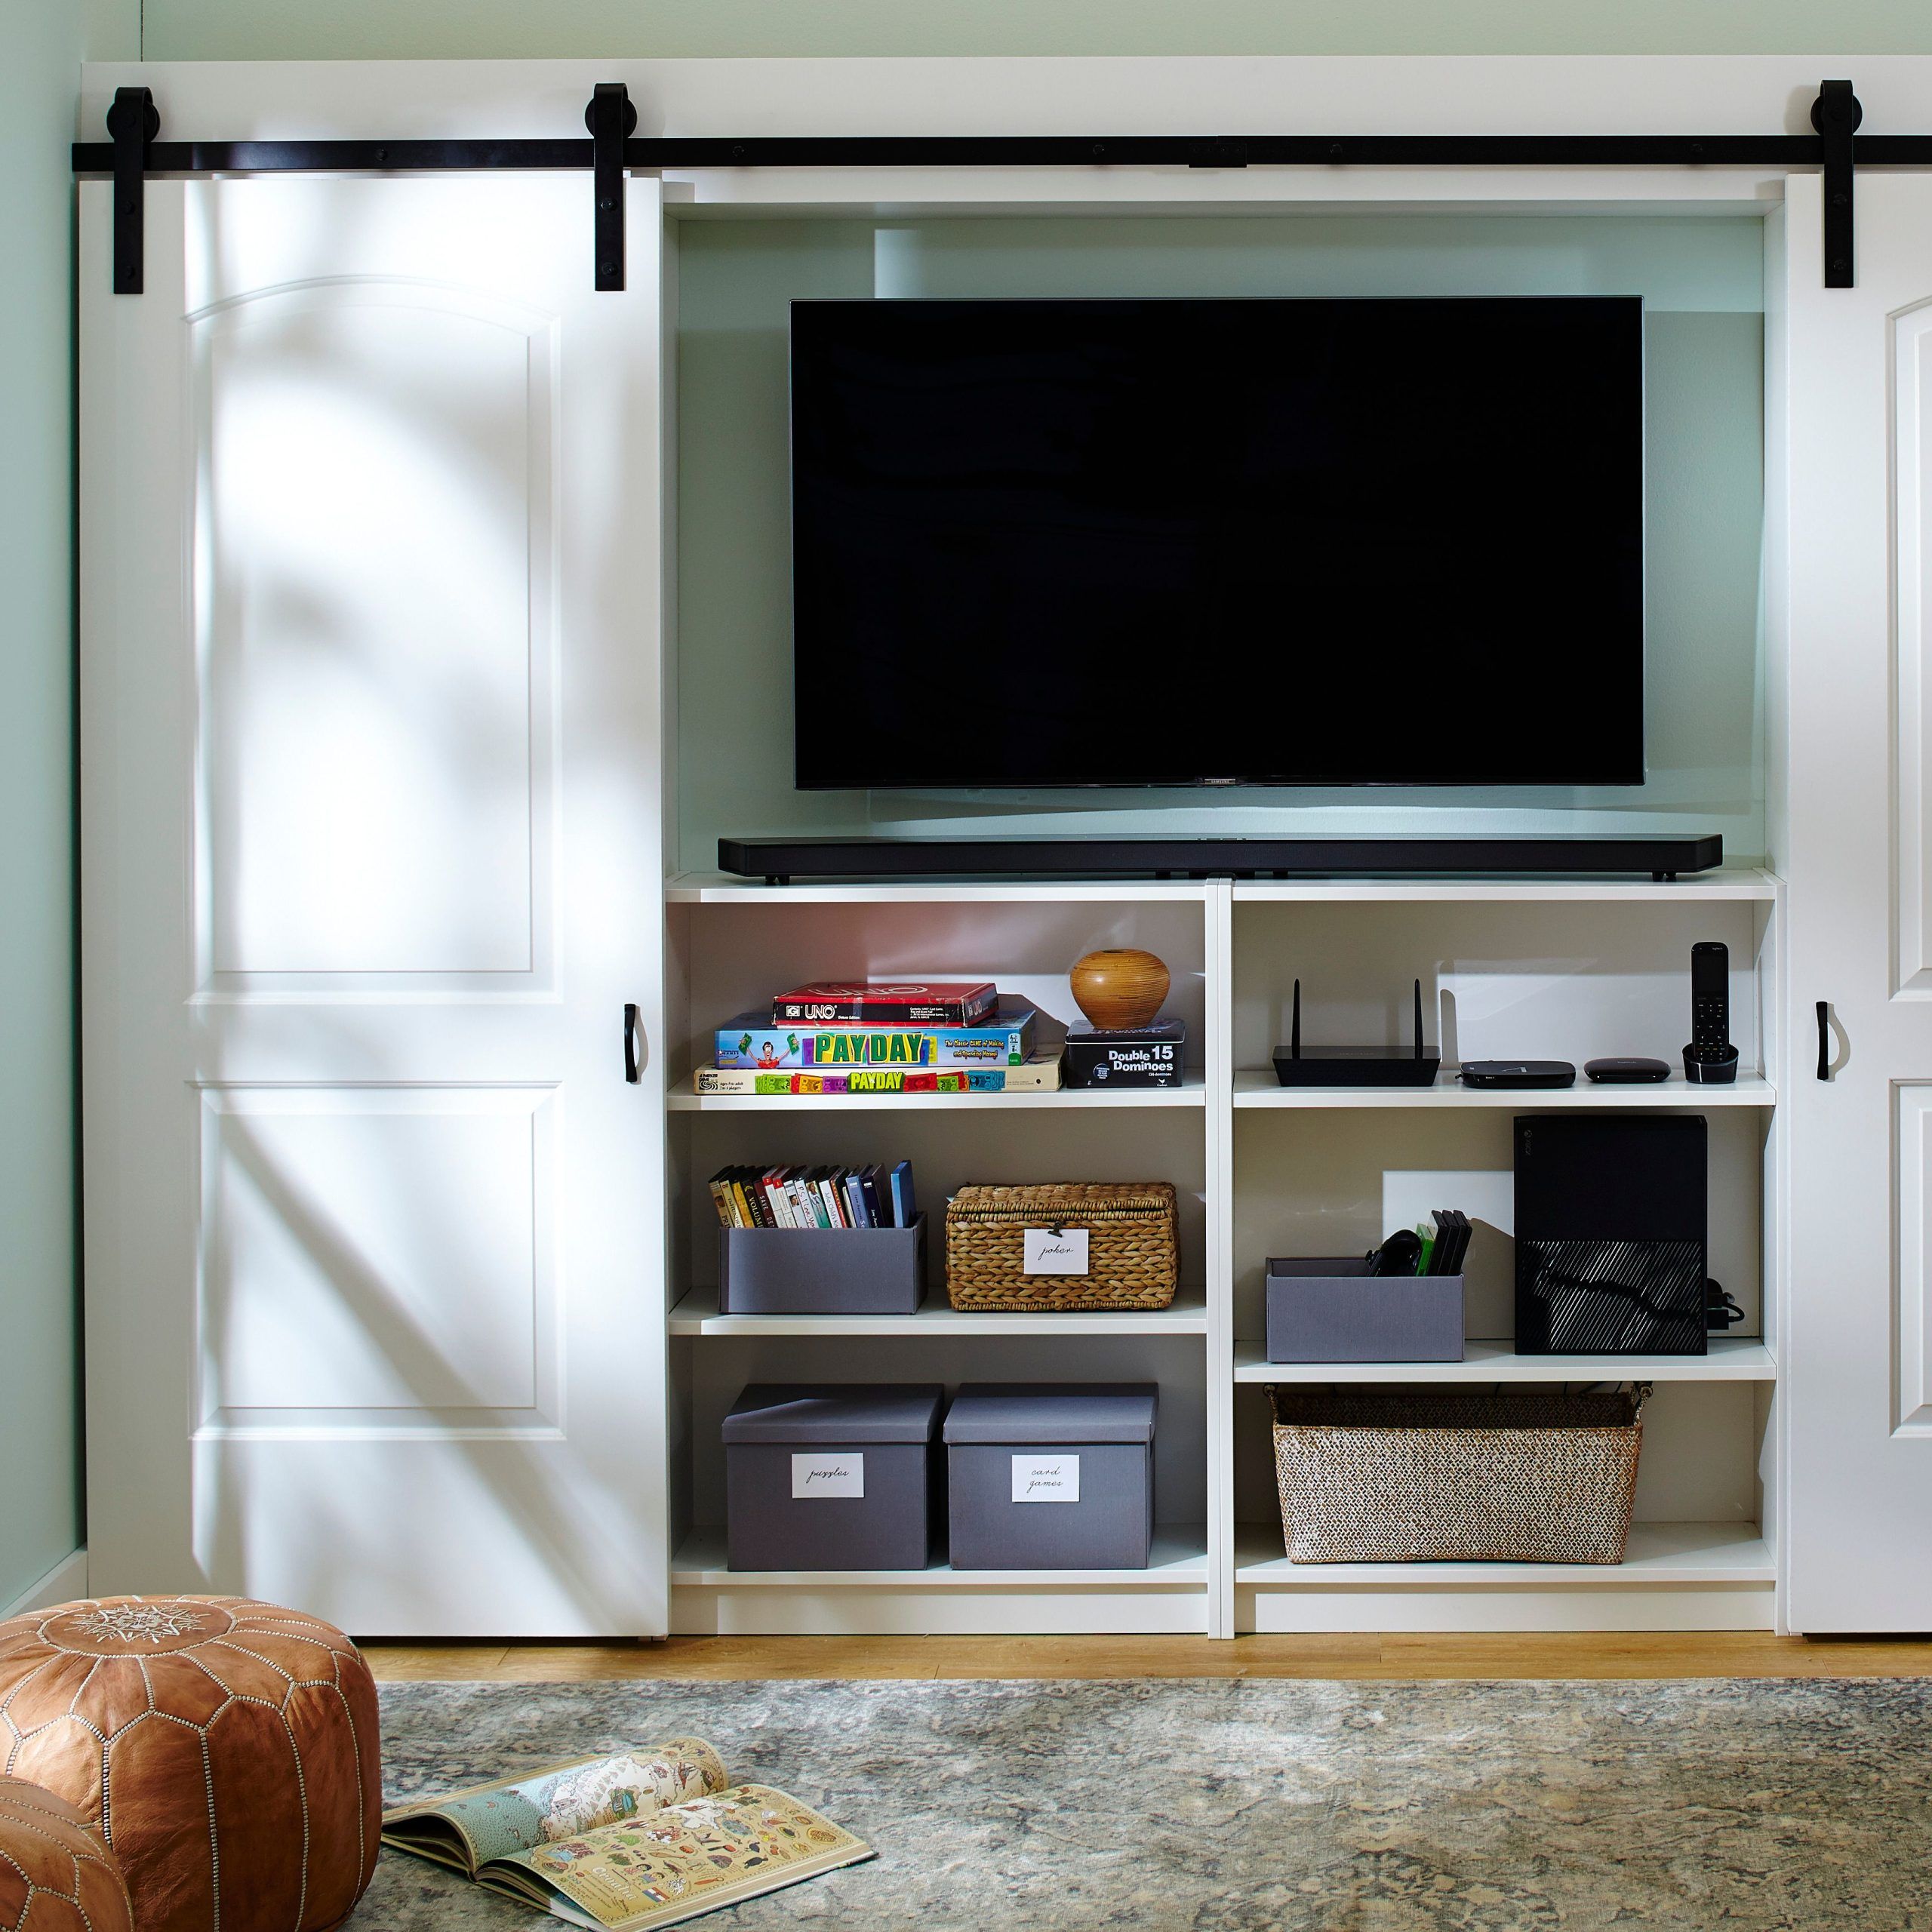 10 Clever Ways To Hide A Tv In Plain Sight In Dual Use Storage Cabinet Tv Stands (View 14 of 16)